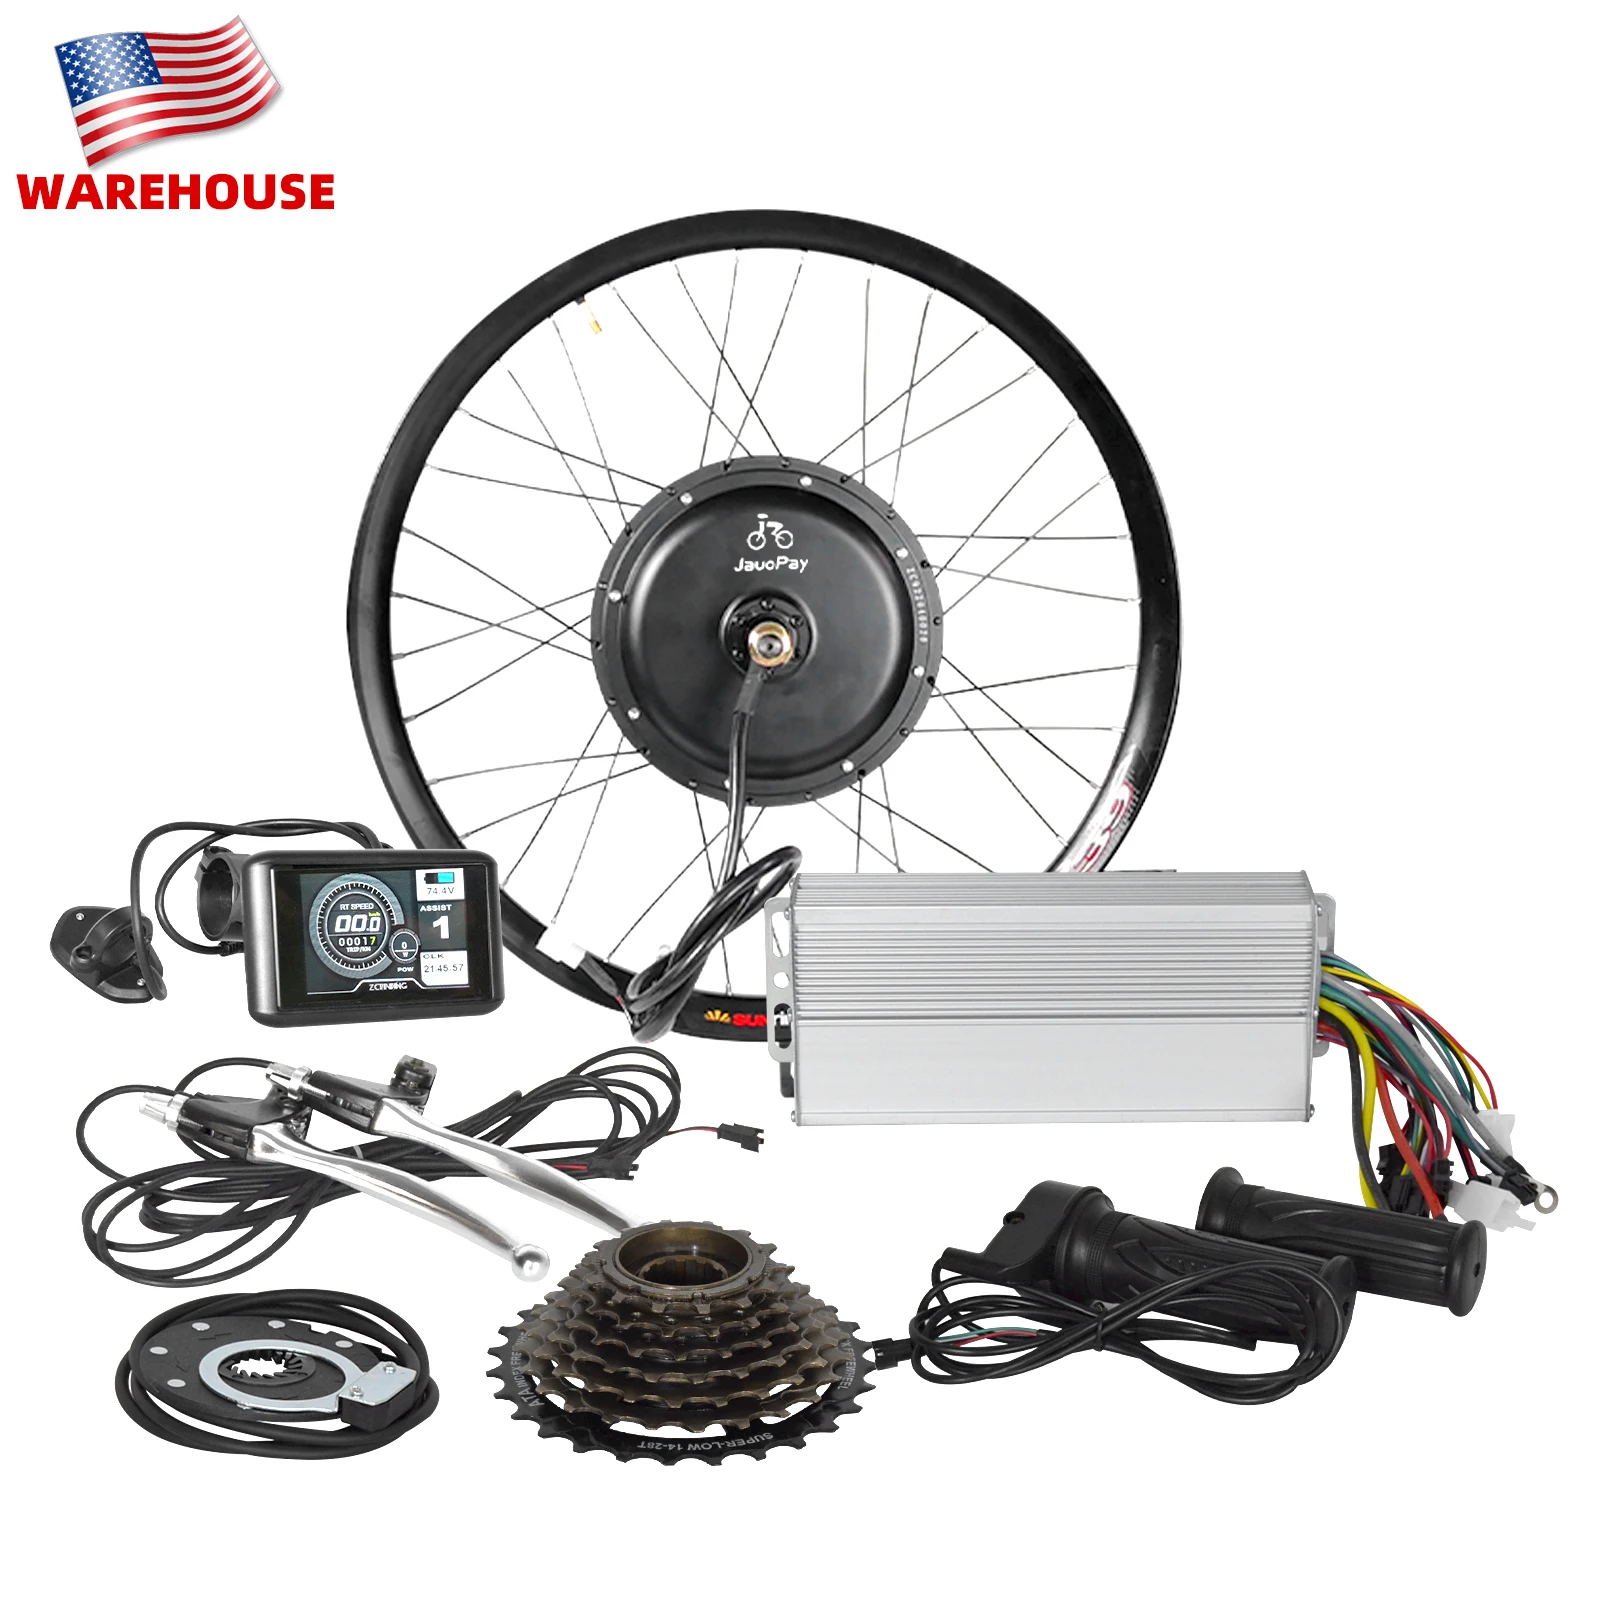 

USA warehouse second hand electric bike kit kit bicicleta electrica made in china